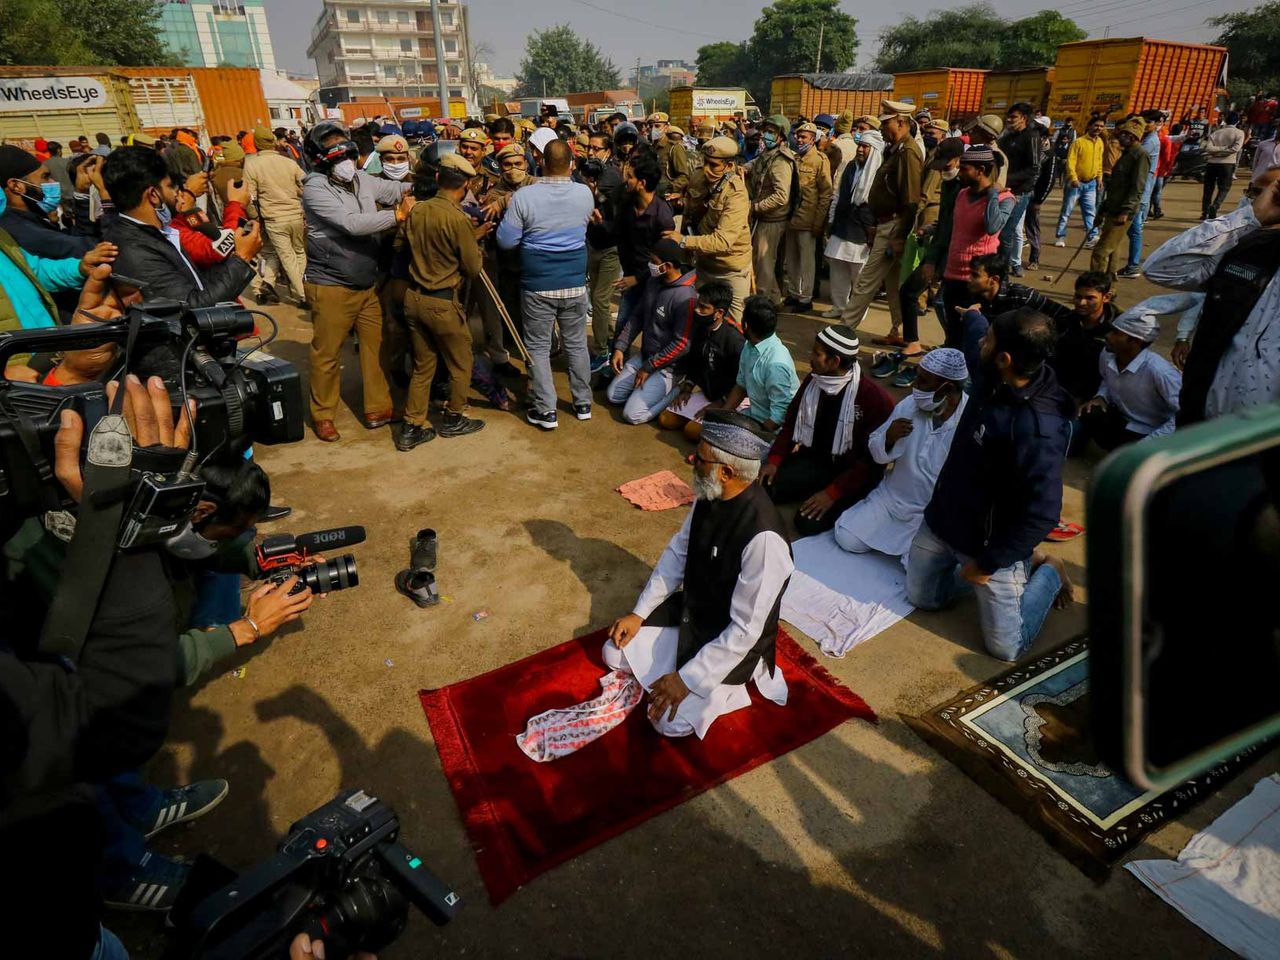 Muslim Devotees offering Namaz in the Presence of heavy Police force at Sector 37 in Gurgaon.